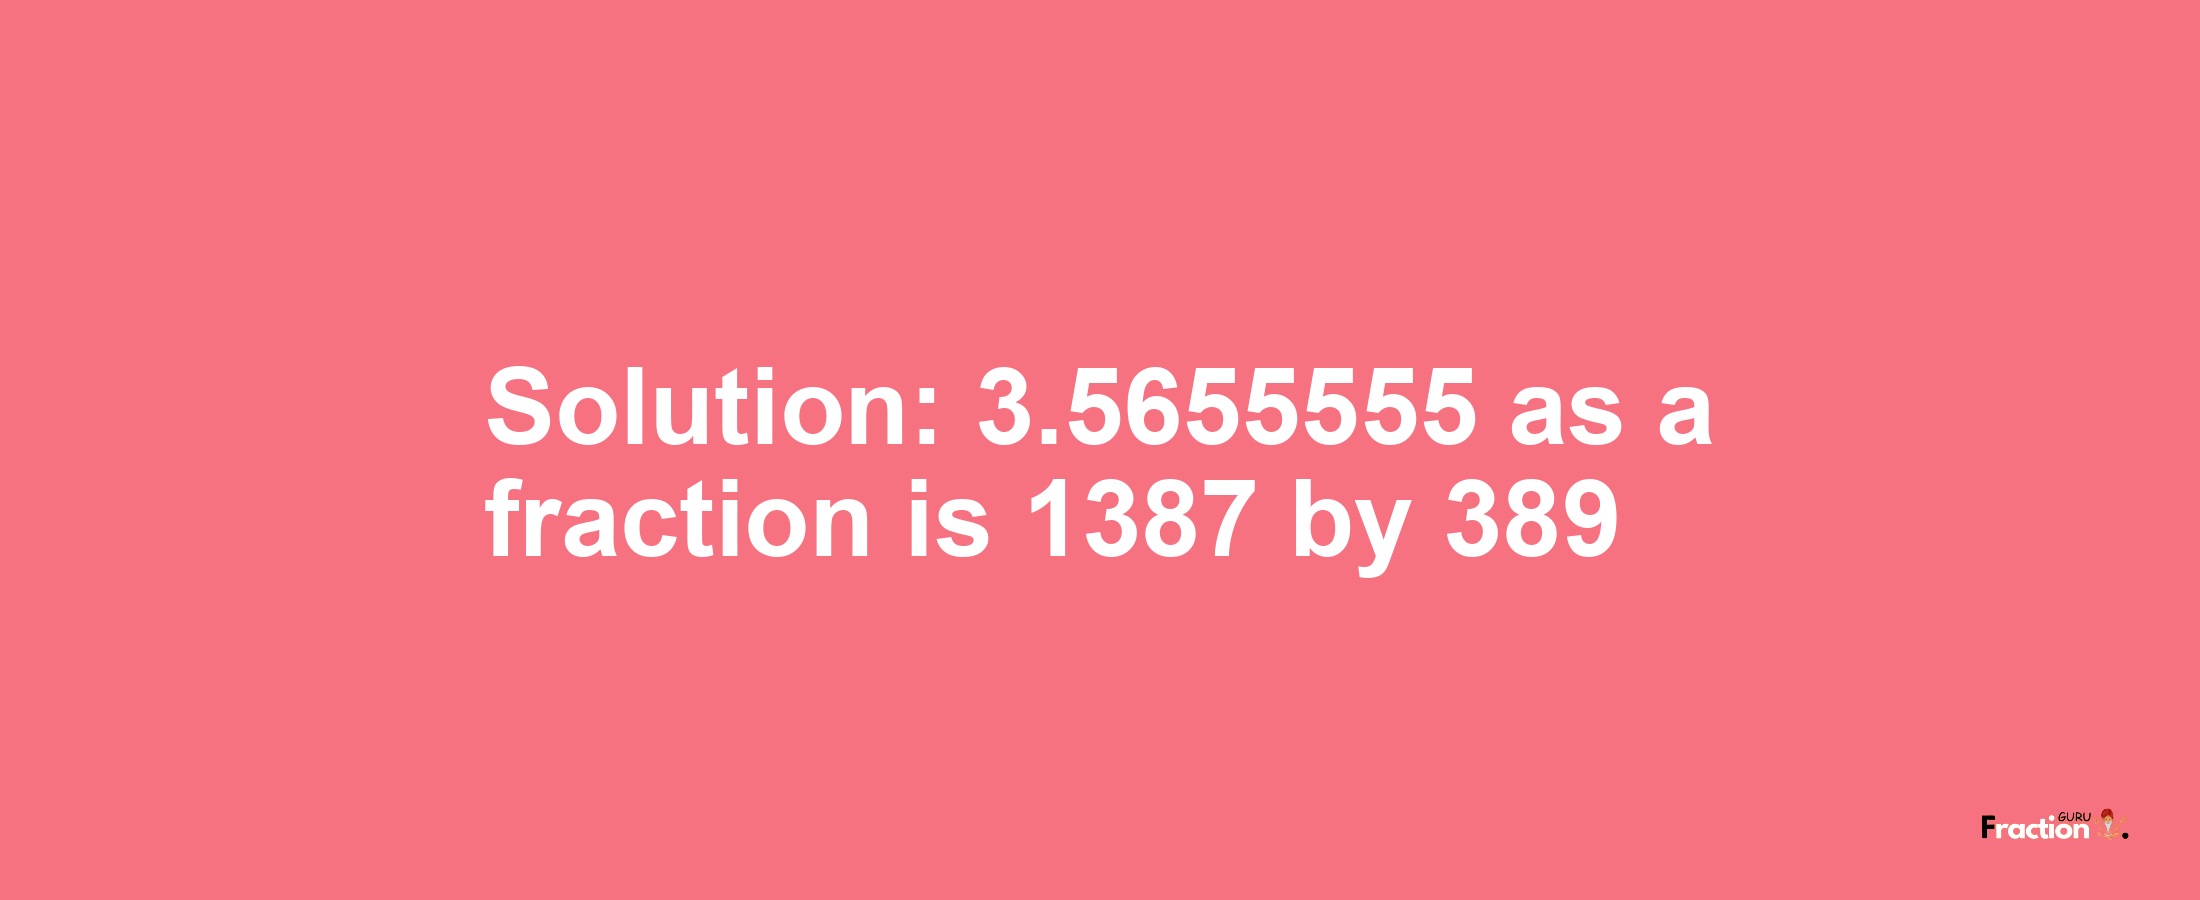 Solution:3.5655555 as a fraction is 1387/389